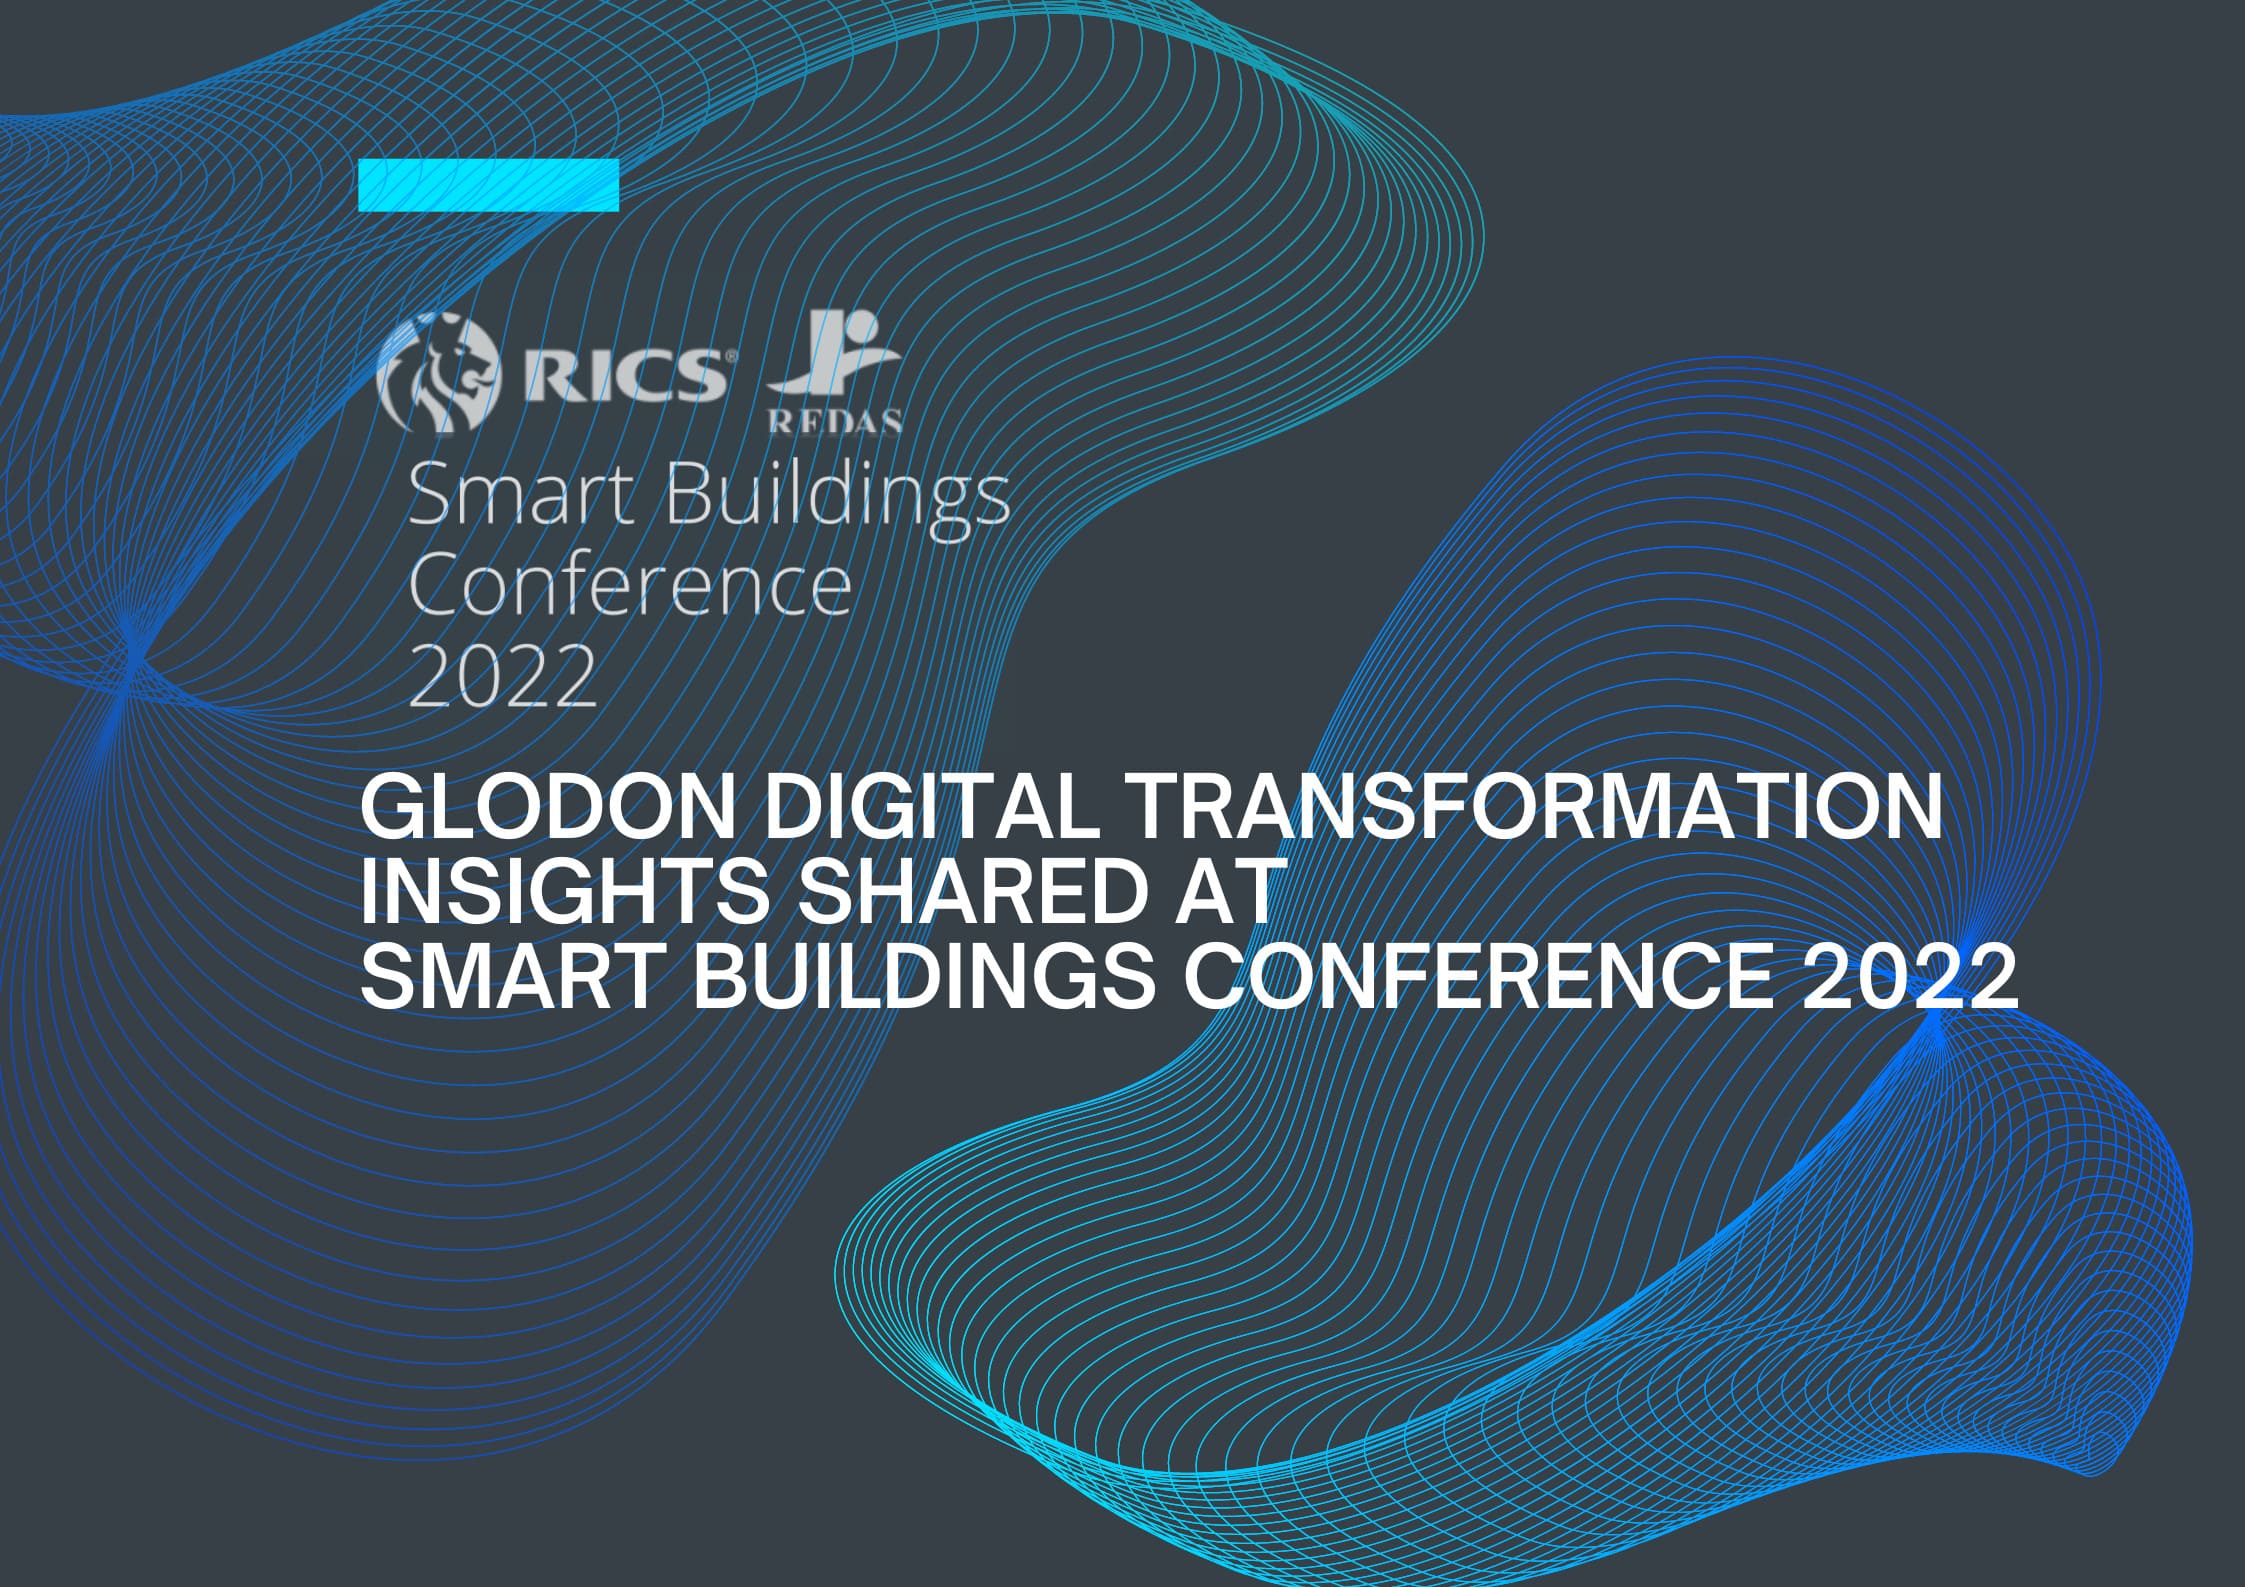 Glodon Digital Transformation Insights Shared at Smart Buildings Conference 2022